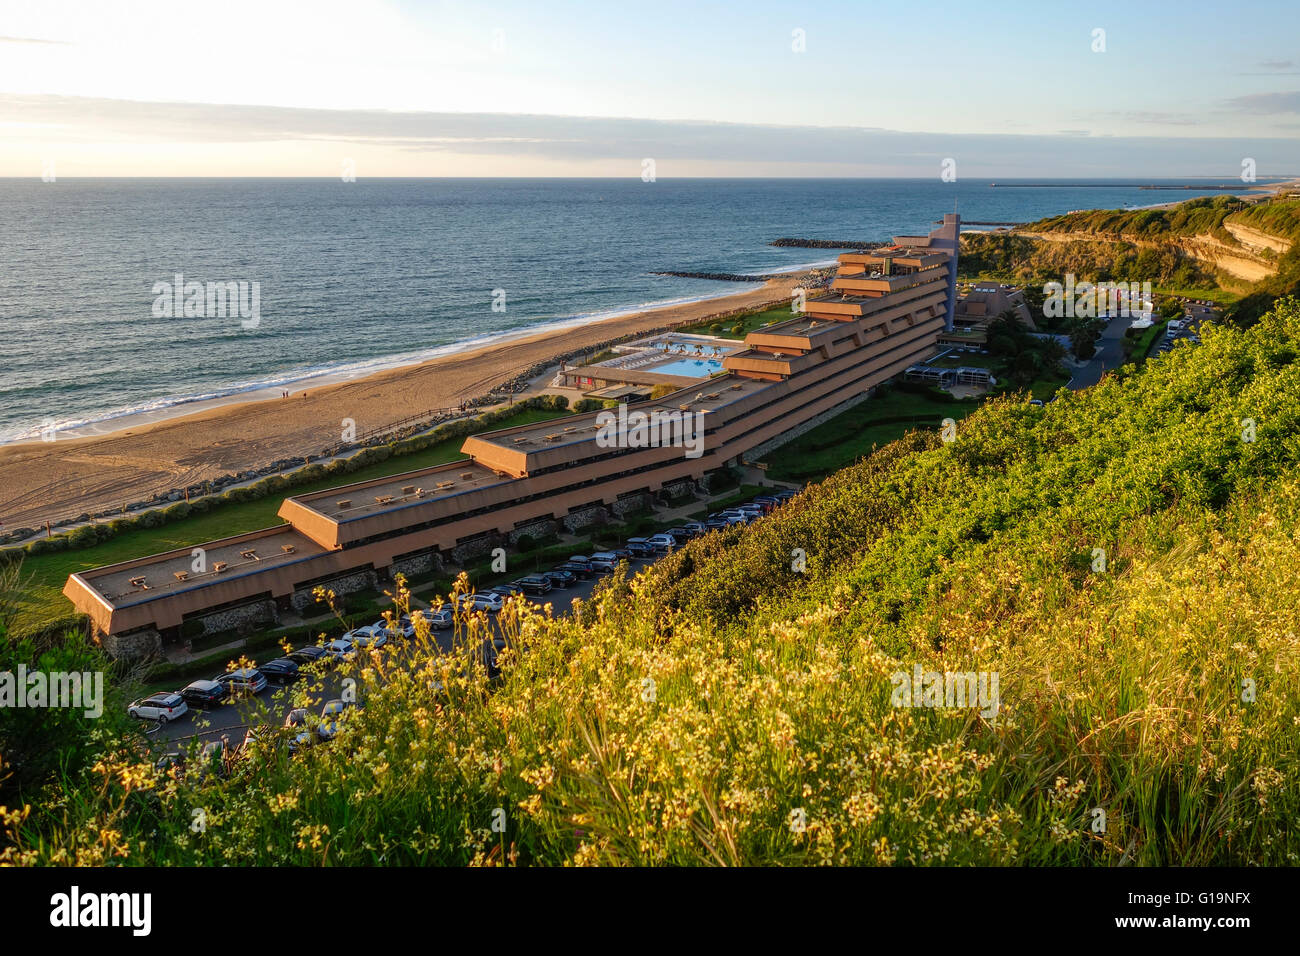 Resort, Hotel, Belambra Clubs, La Chambre d'Amour, Aquitaine, Biarritz, French basque country, France. Stock Photo